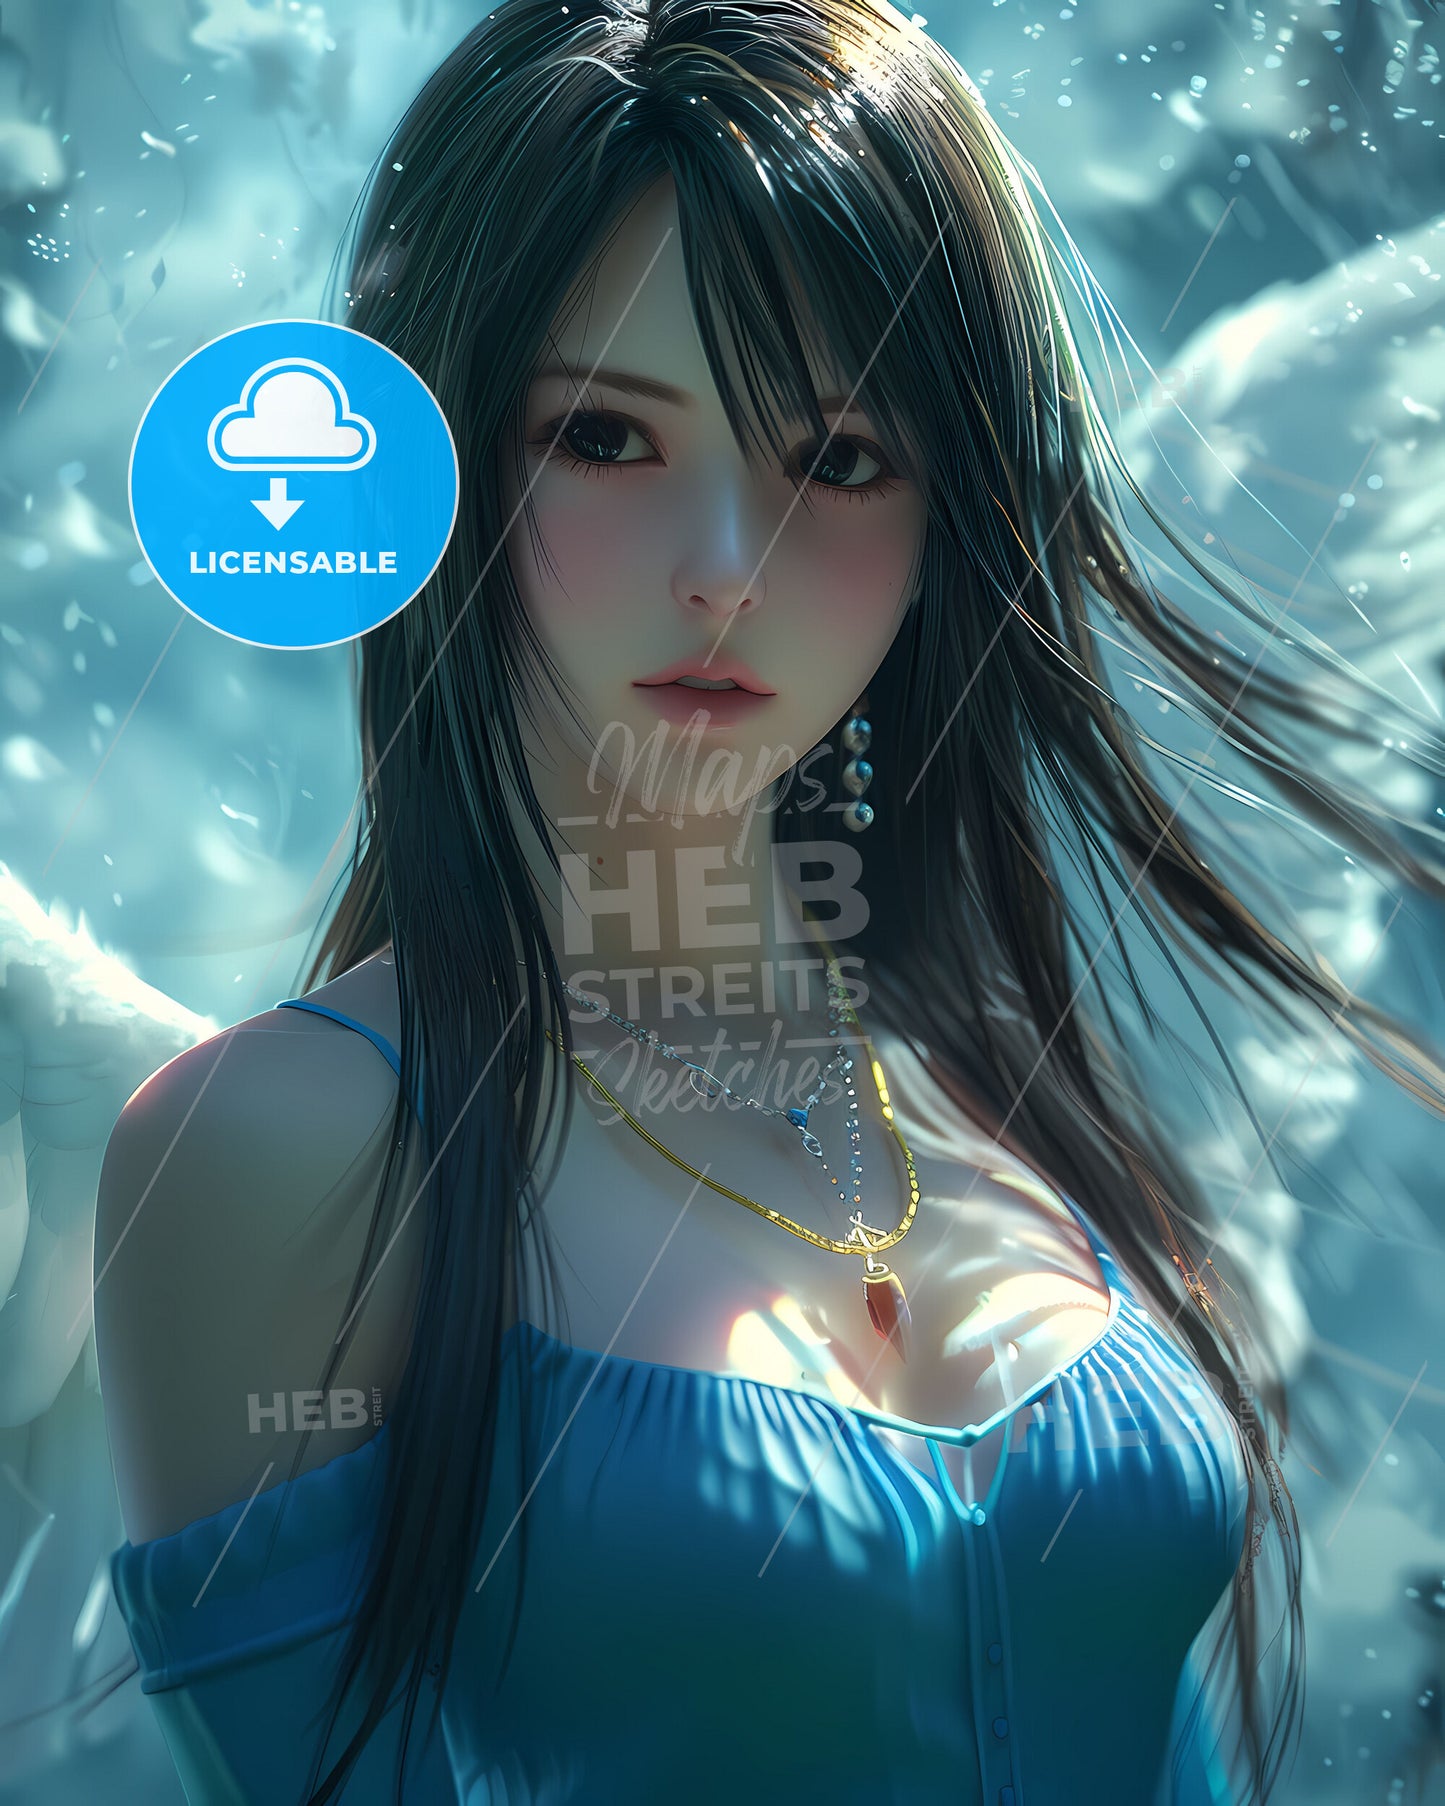 Angelic Fantasy: Vibrant Digital Painting of a Blue-Clad Angel with Black Hair Flying in a Cloudy Sky